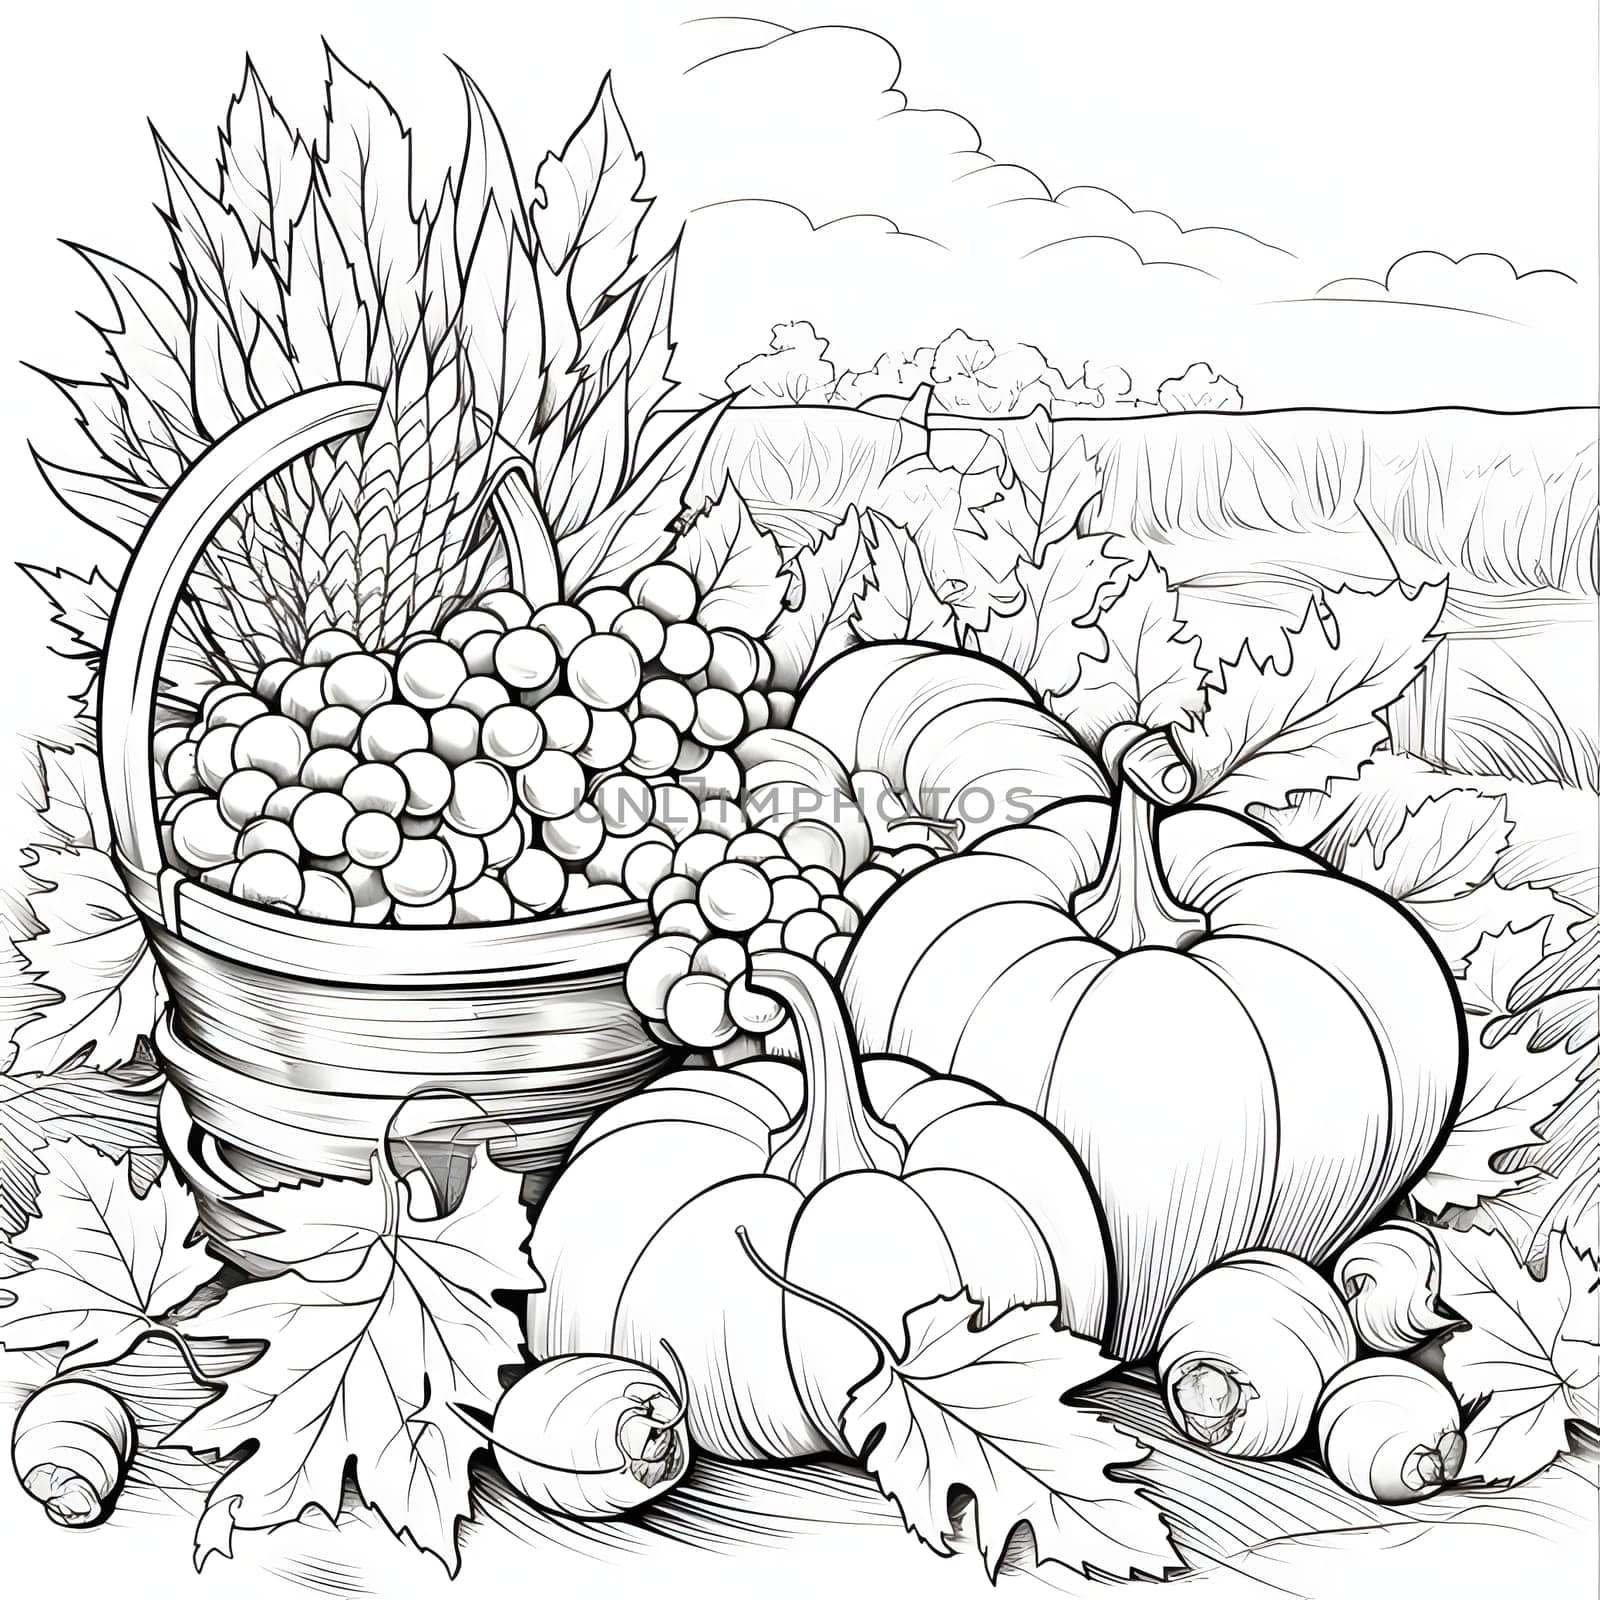 Black and White coloring book, basket full of grapes around pumpkin leaves. Pumpkin as a dish of thanksgiving for the harvest, picture on a white isolated background. An atmosphere of joy and celebration.